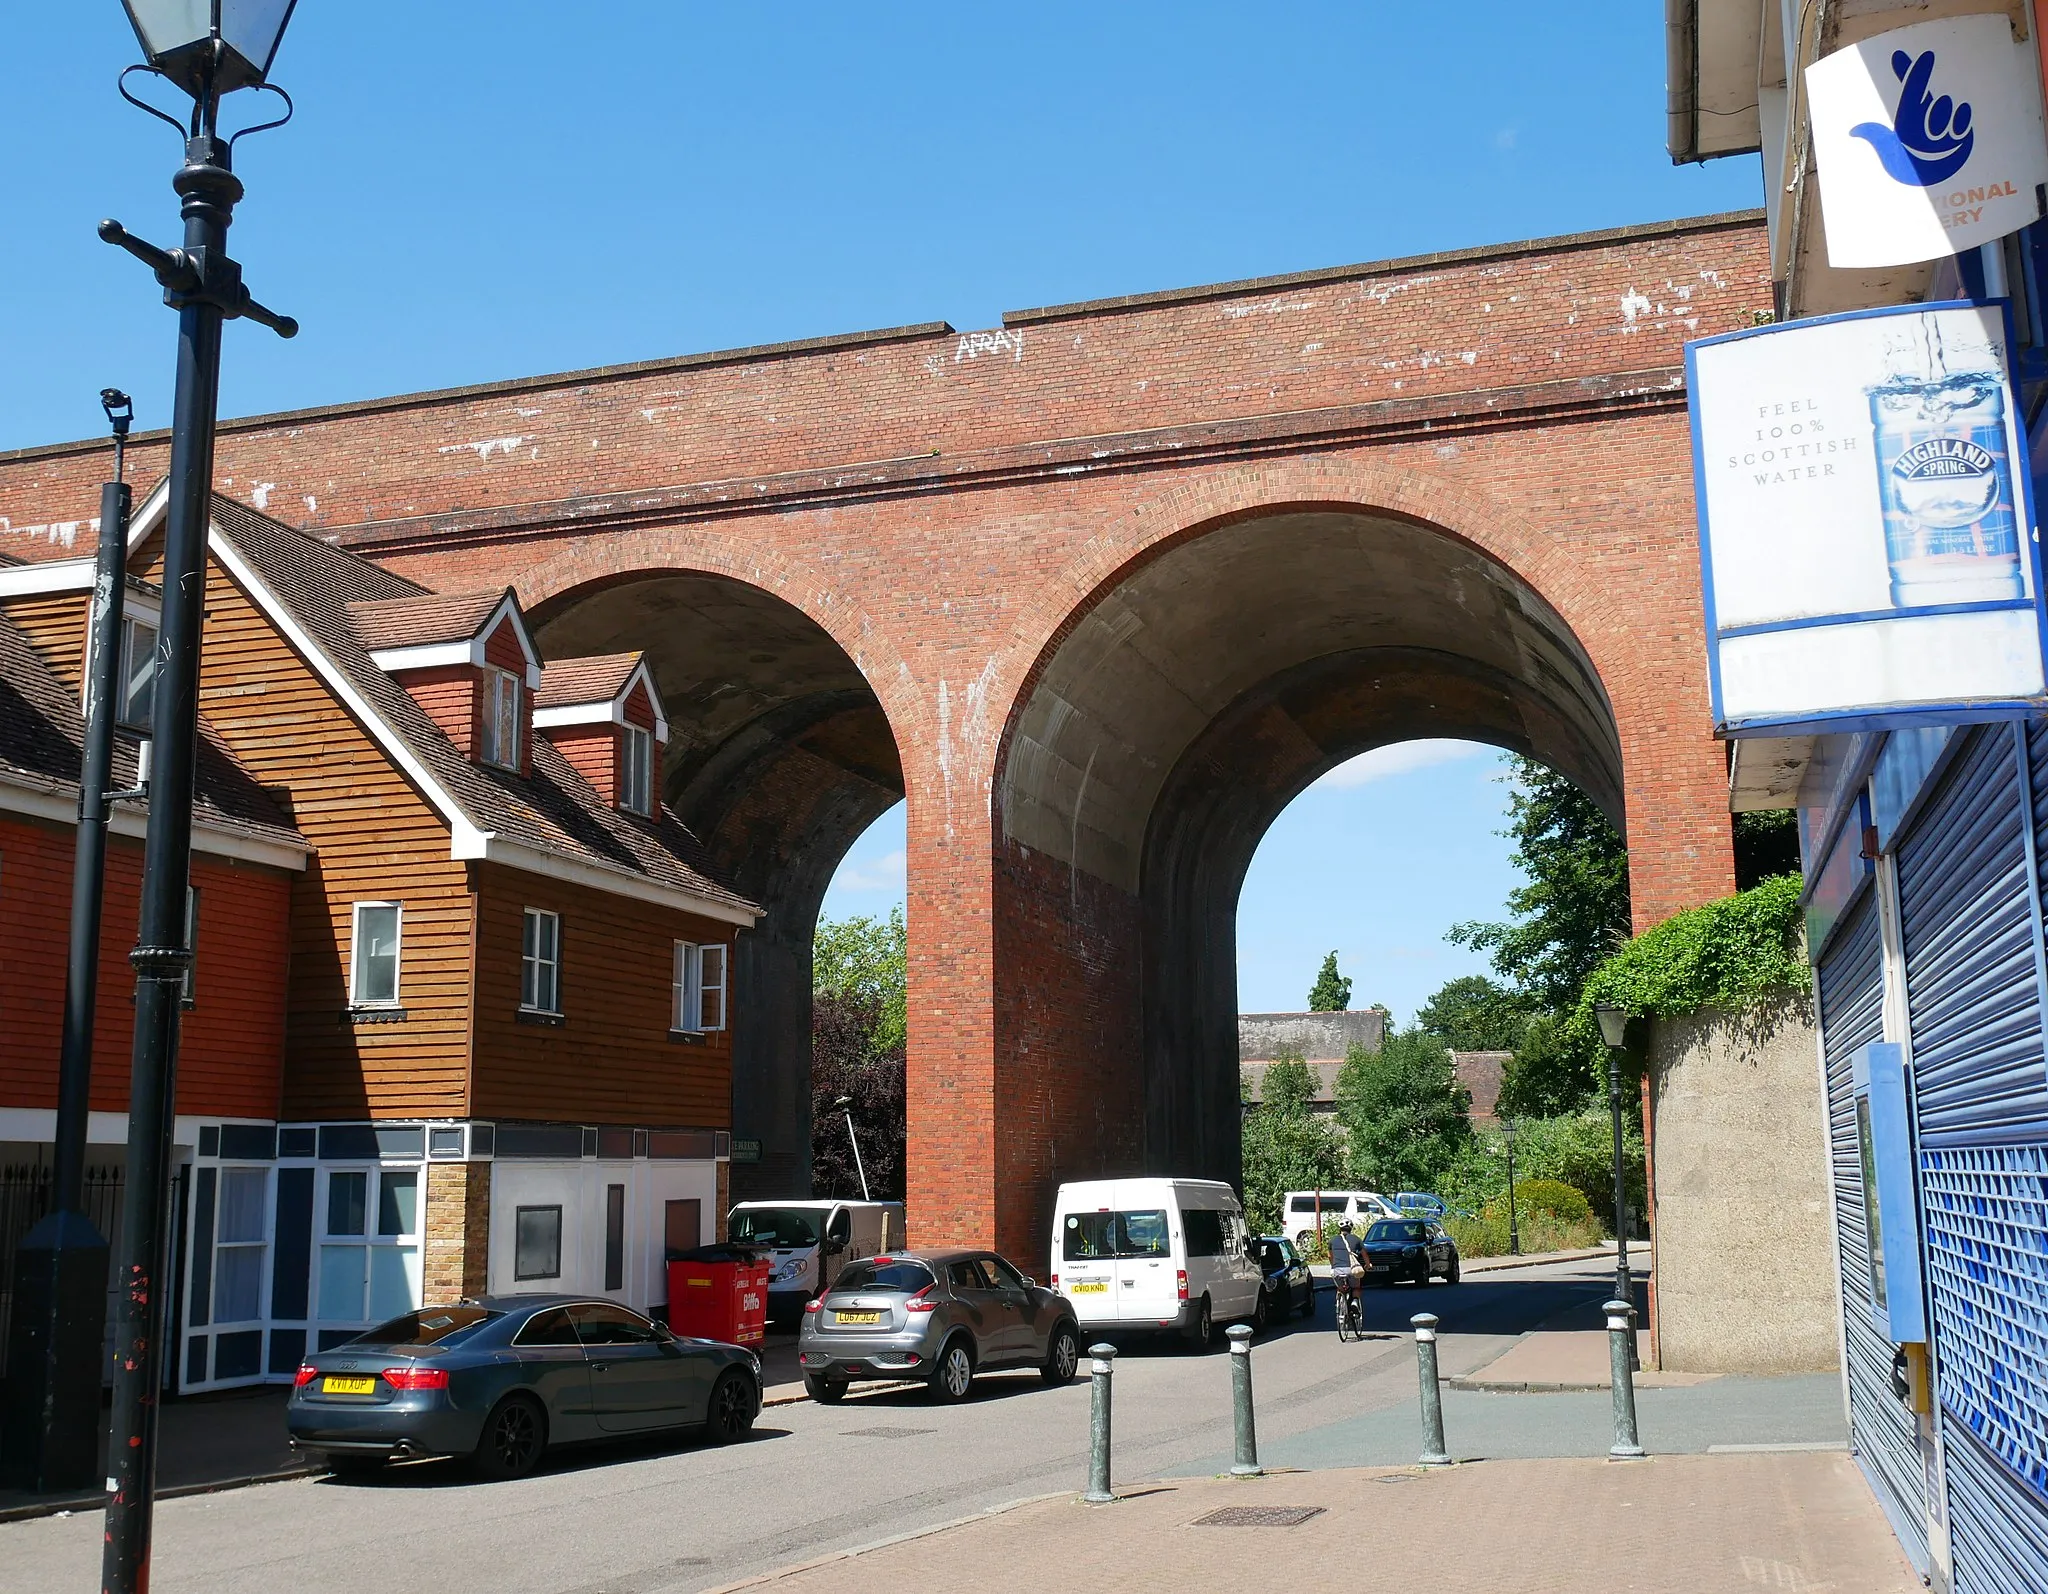 Photo showing: The railway arches that run through St Mary Cray in the London Borough of Bromley, as seen from the southern side.